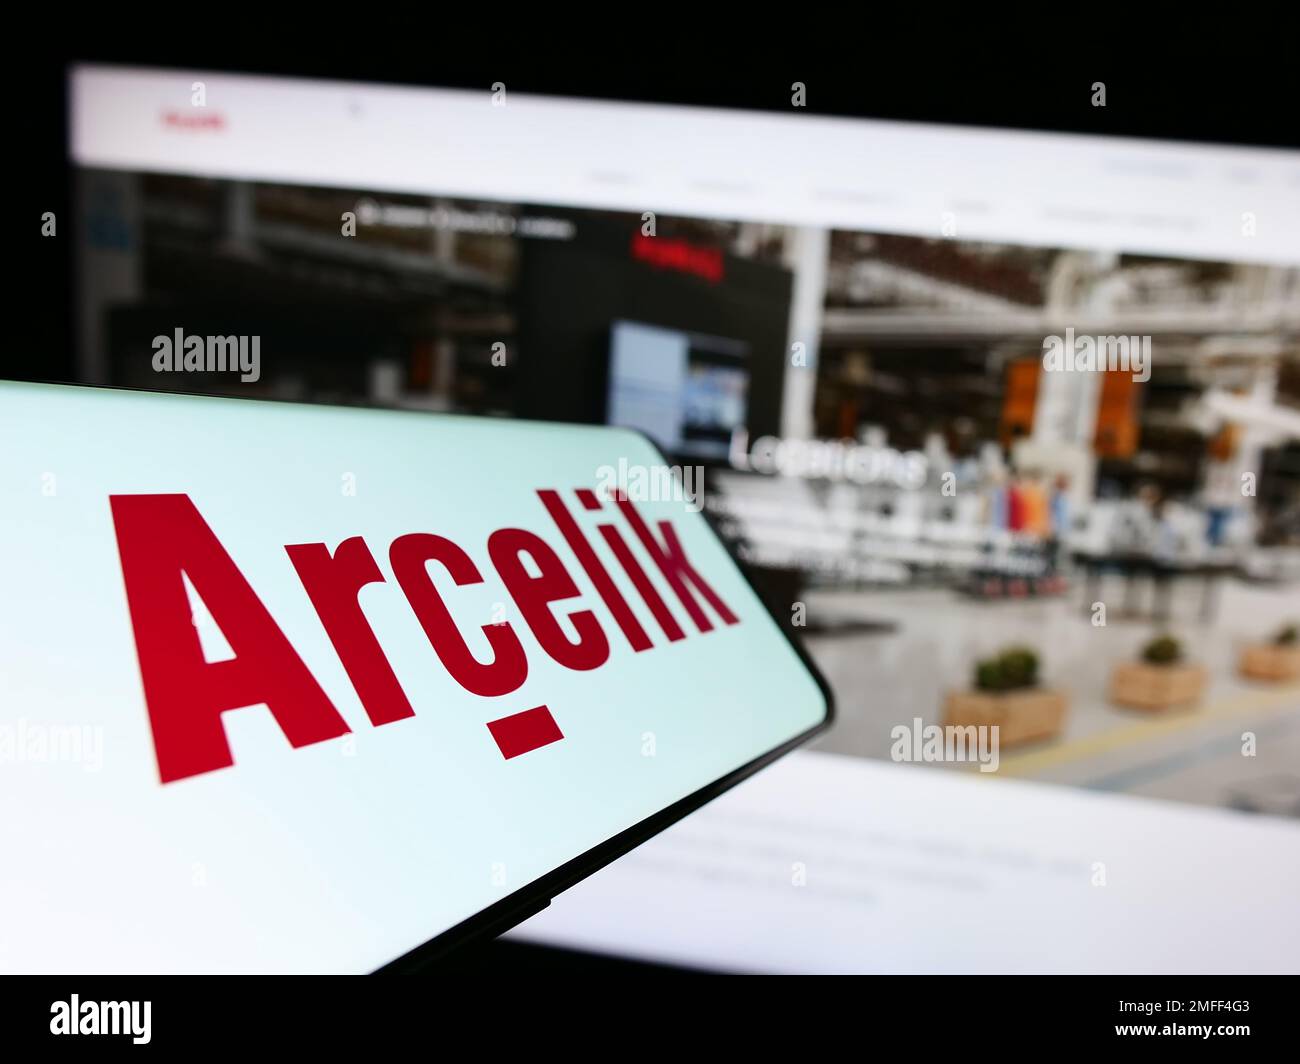 Cellphone with logo of household appliances company Arcelik A.S. on screen in front of business website. Focus on center-left of phone display. Stock Photo